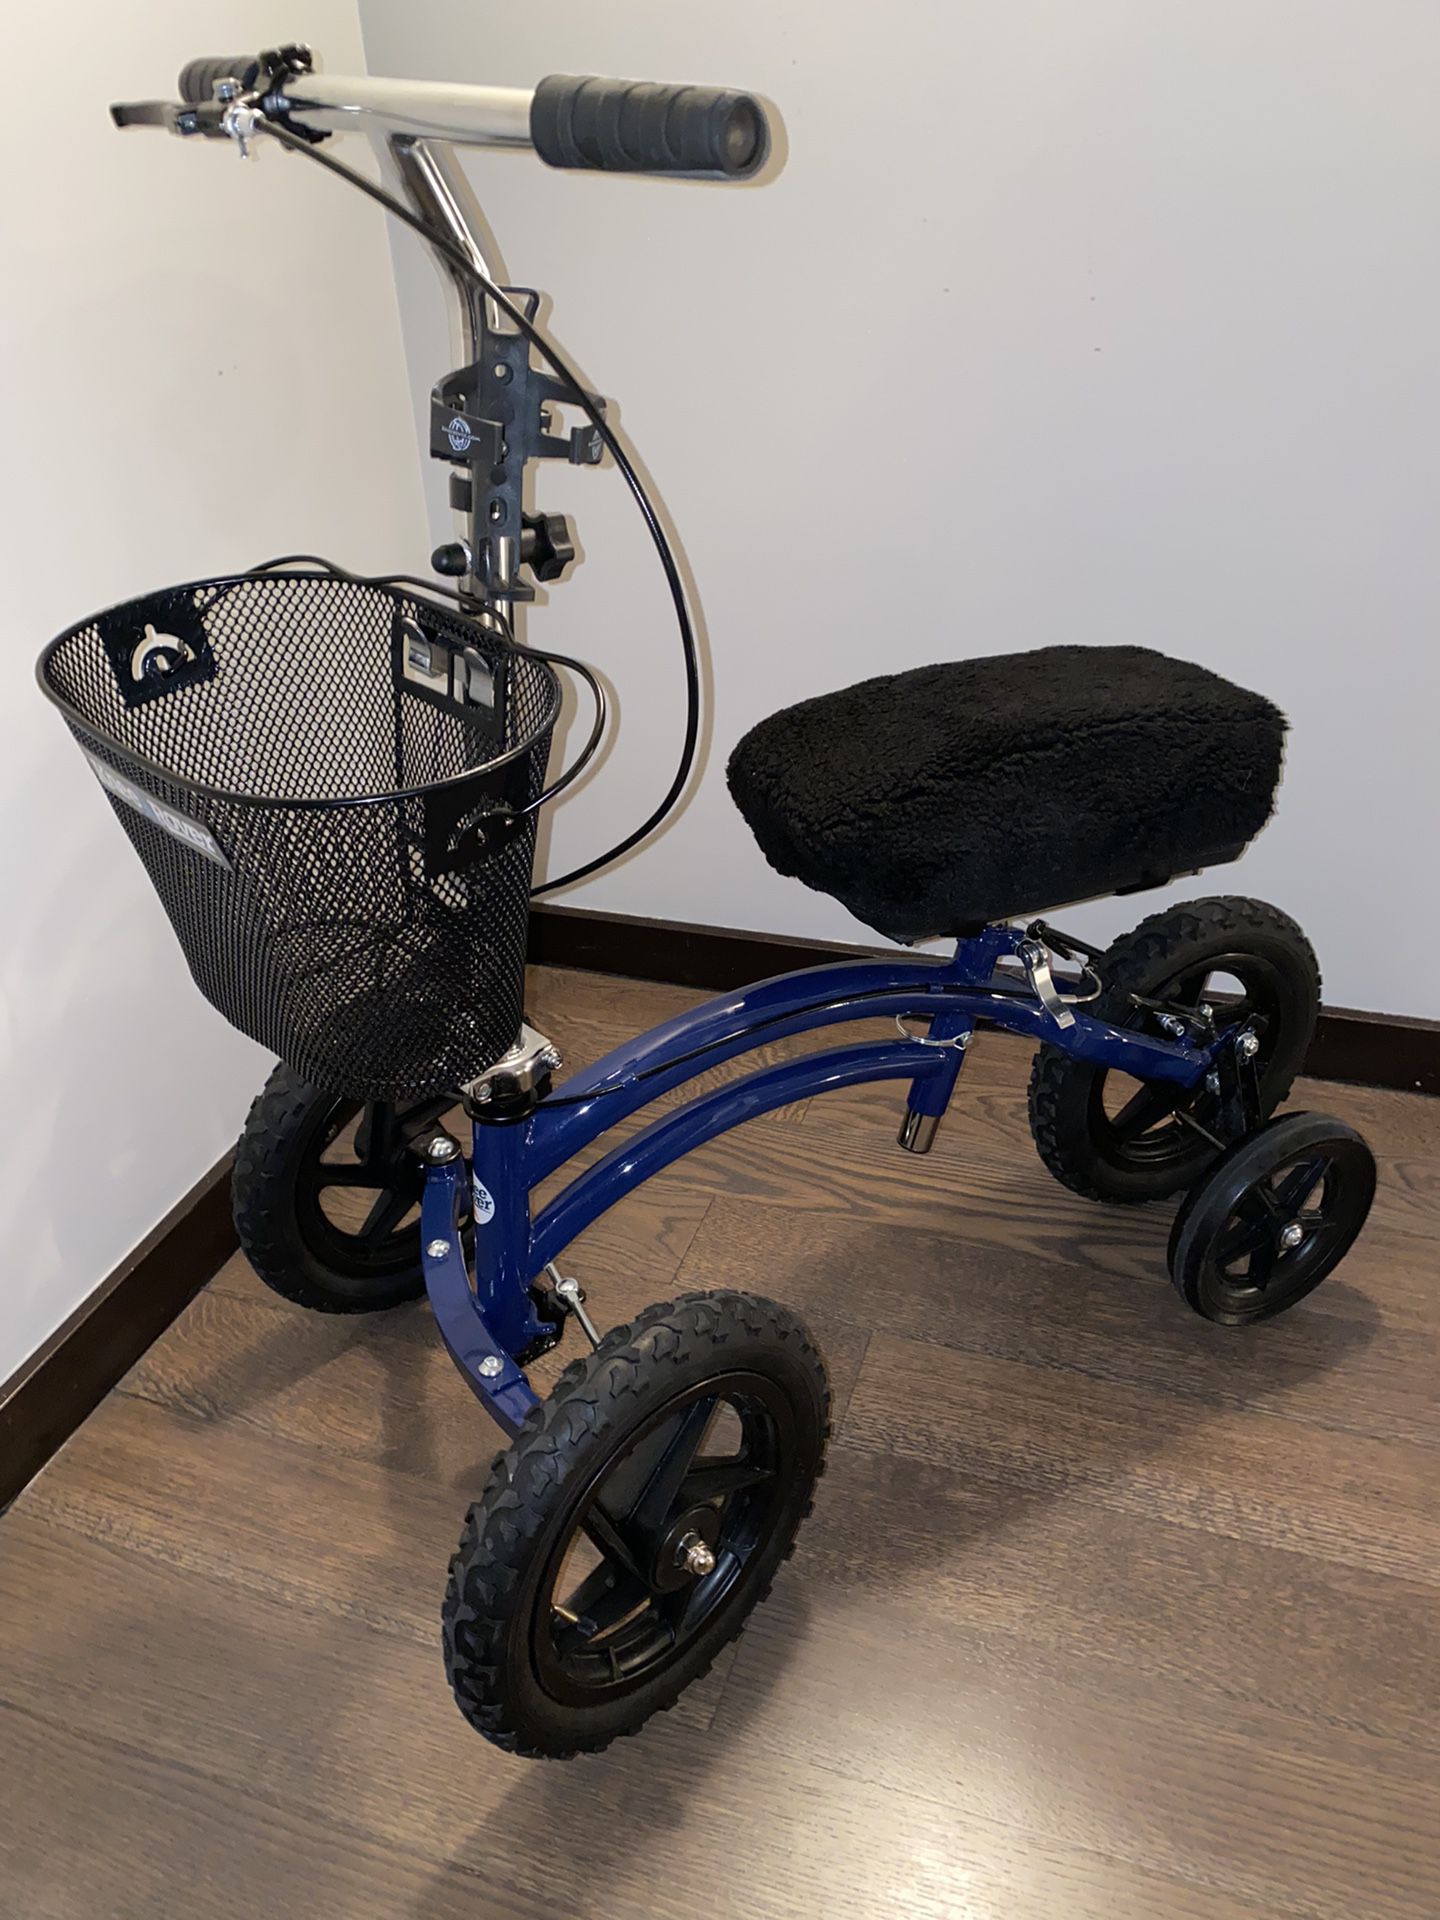 Knee Rover Knee Scooter With Knee Pad And Cup Holder 